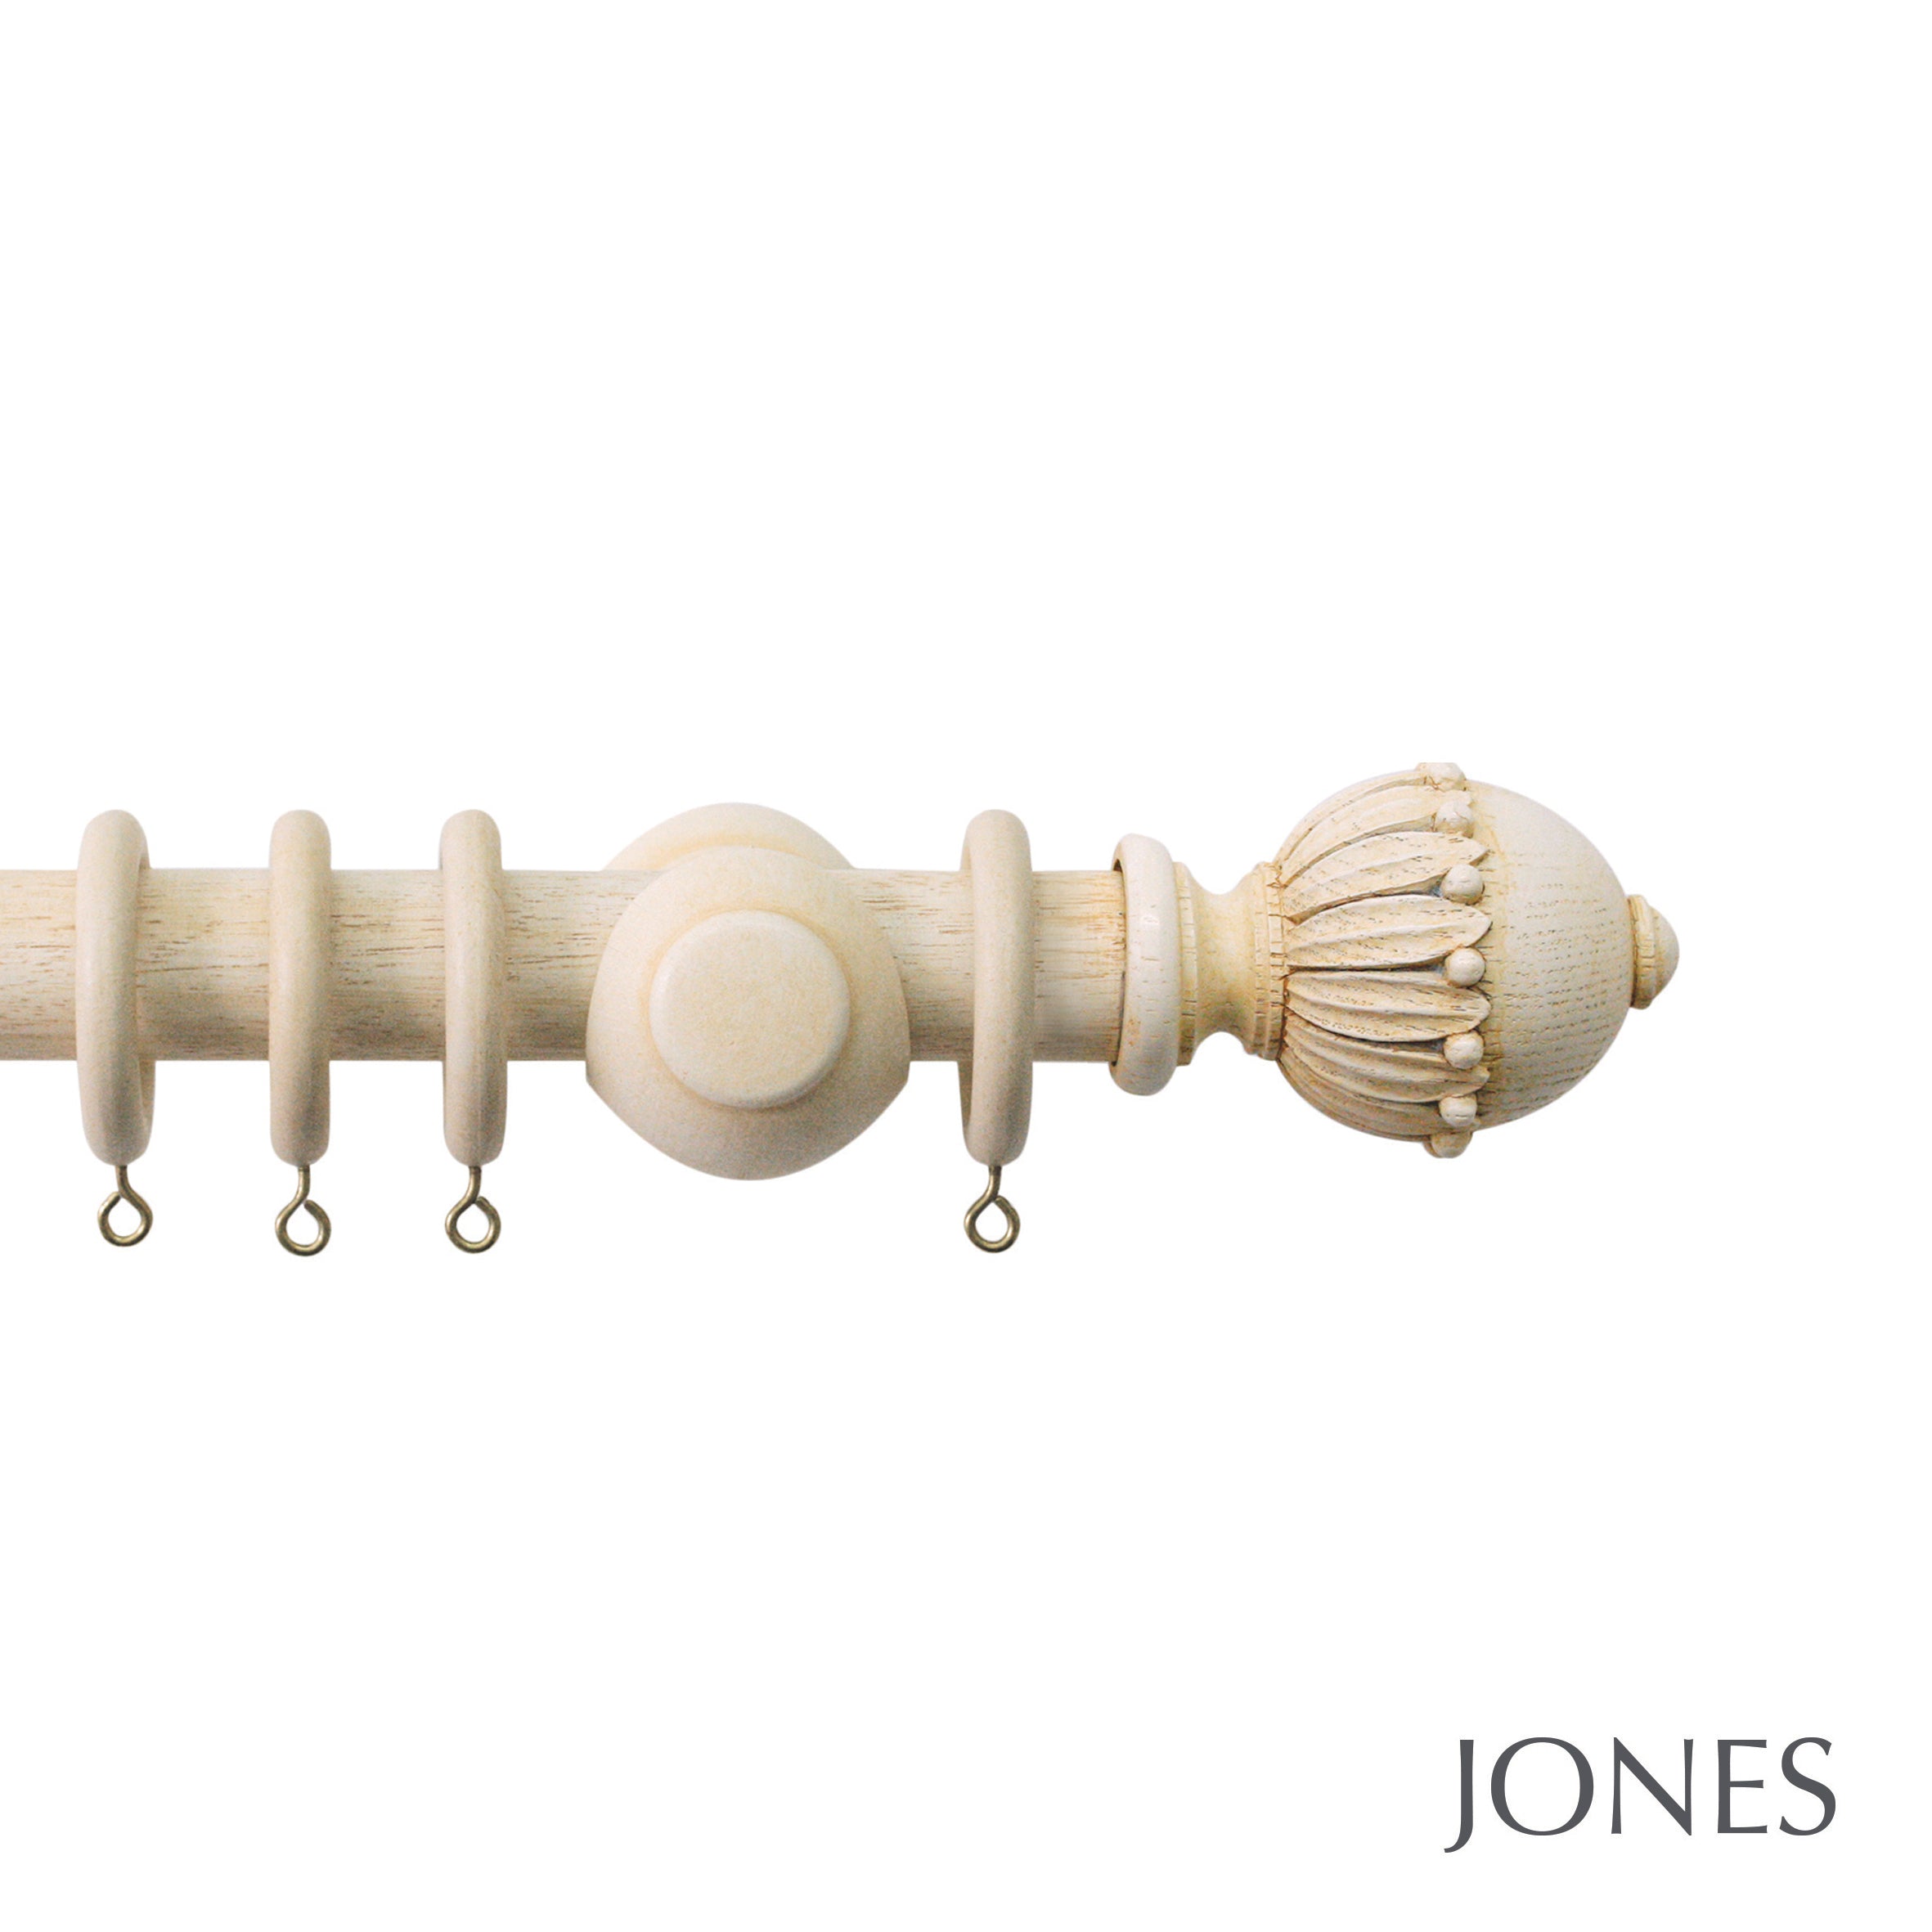 Jones Interiors Cathedral Wells Finial Curtain Pole Set in Ivory